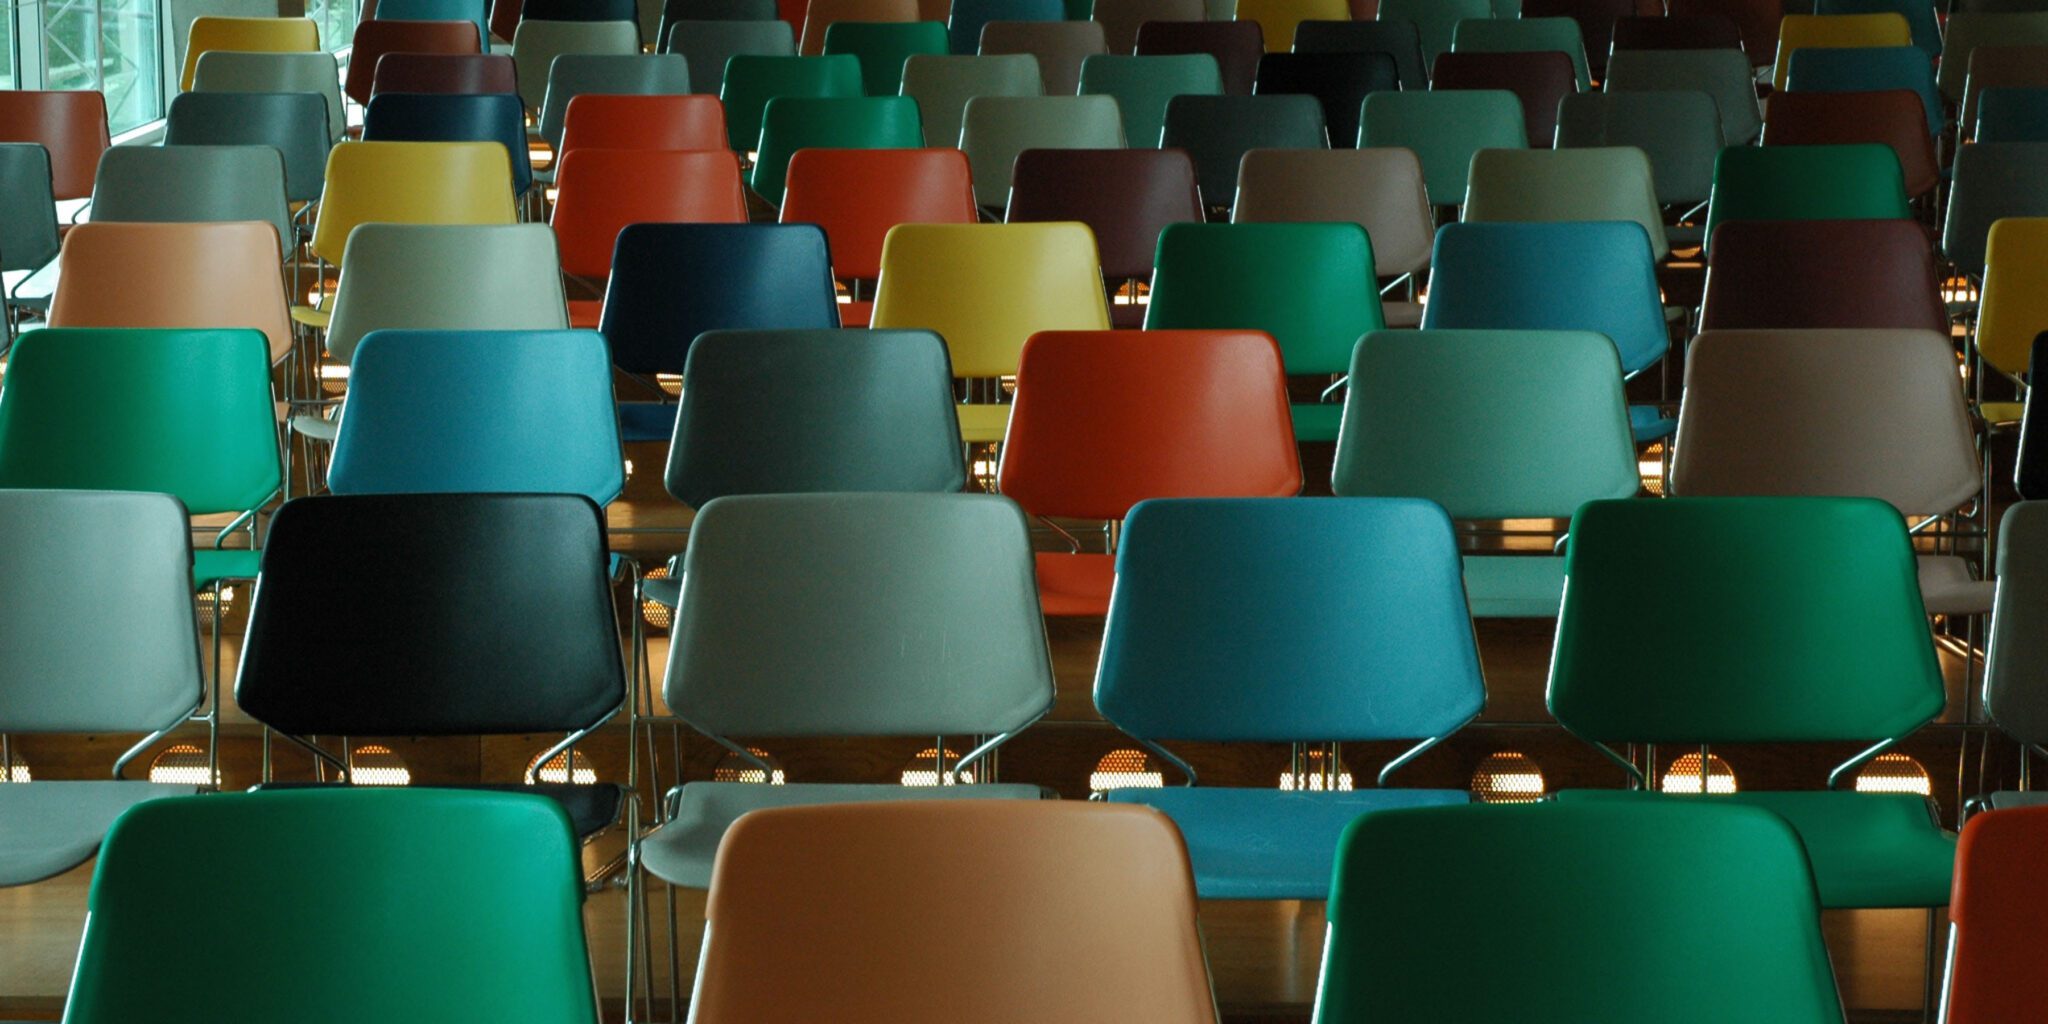 Empty chairs in a college classroom. This page displays information about funding for college students.